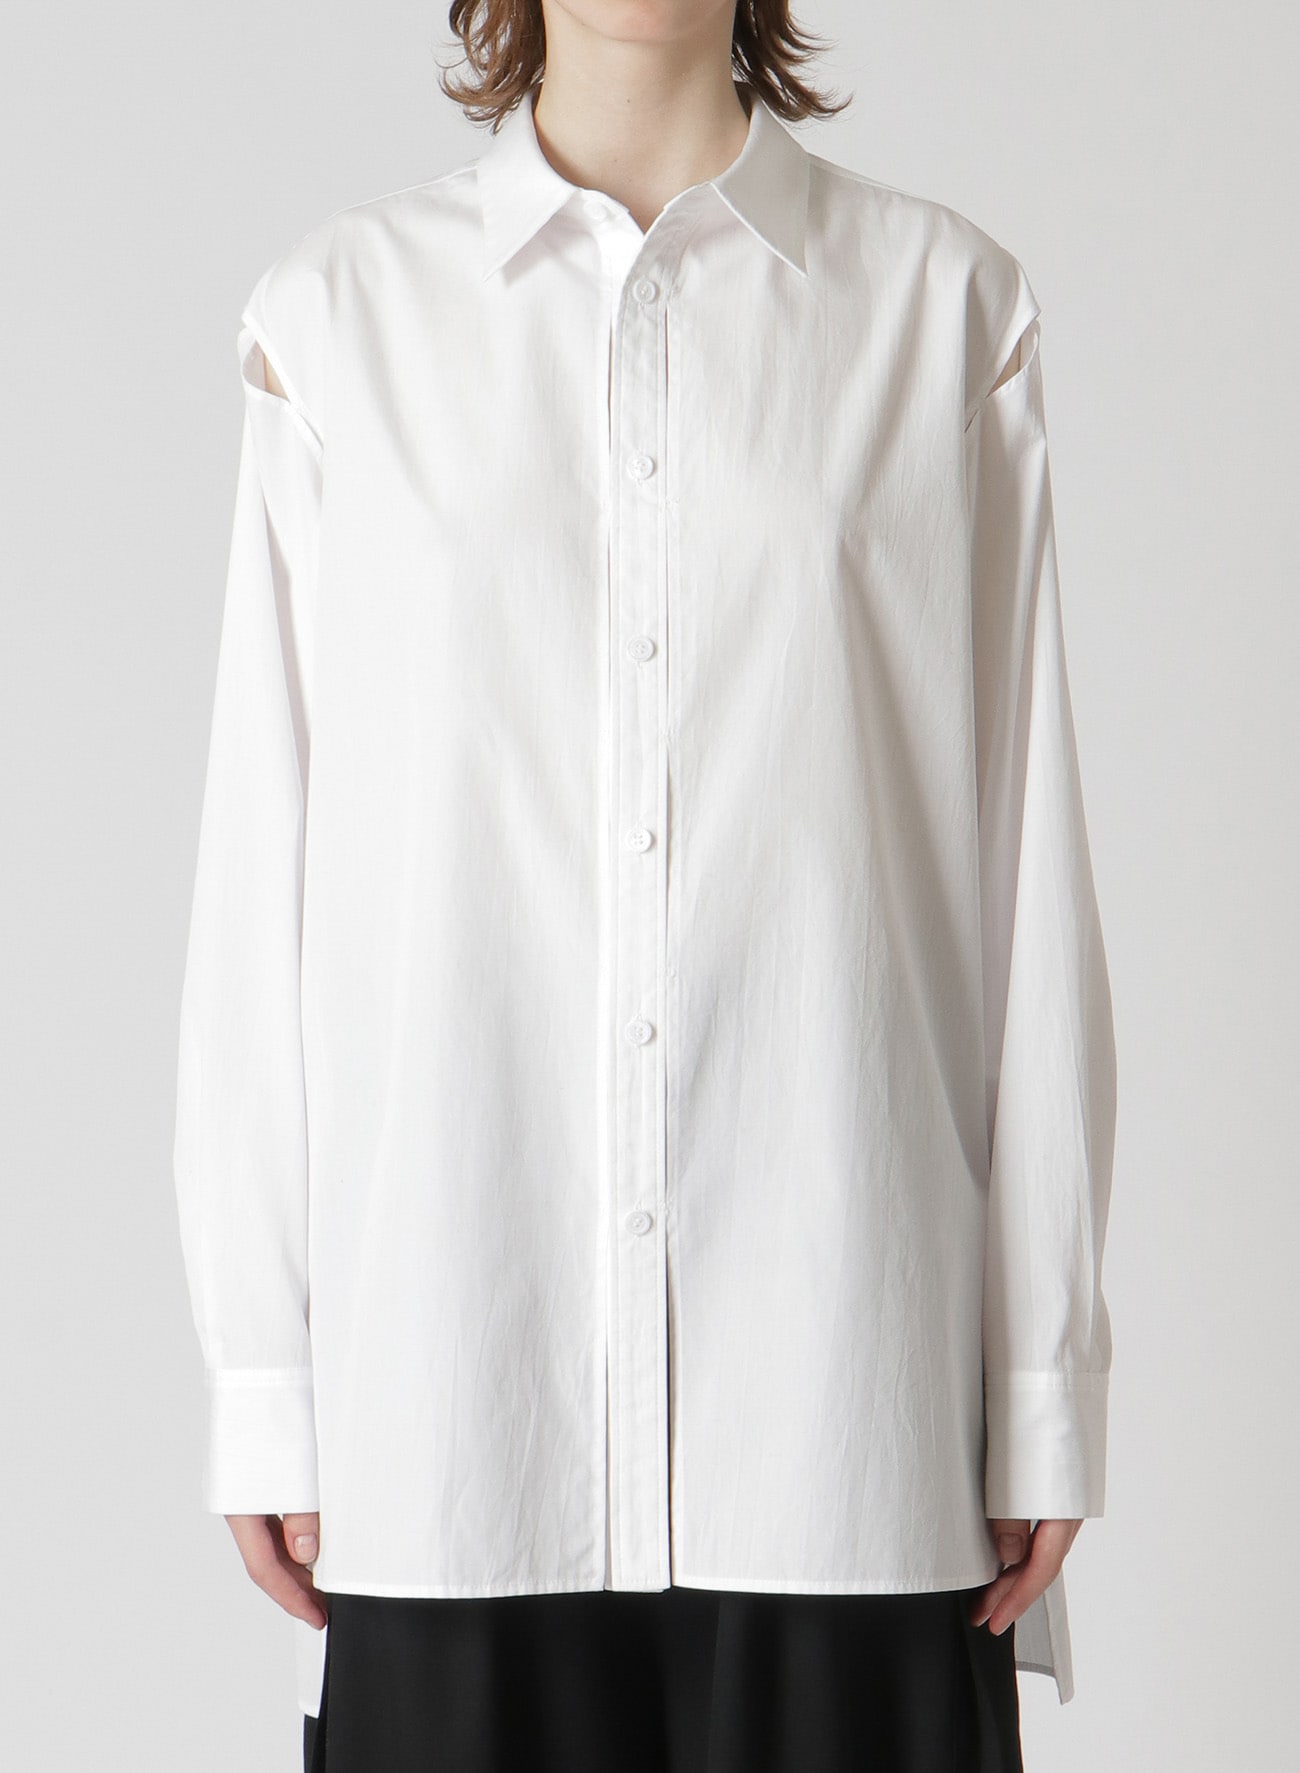 COTTON BROADCLOTH DECONSTRUCTED SLEEVE DETAIL SHIRT(XS White): Y's